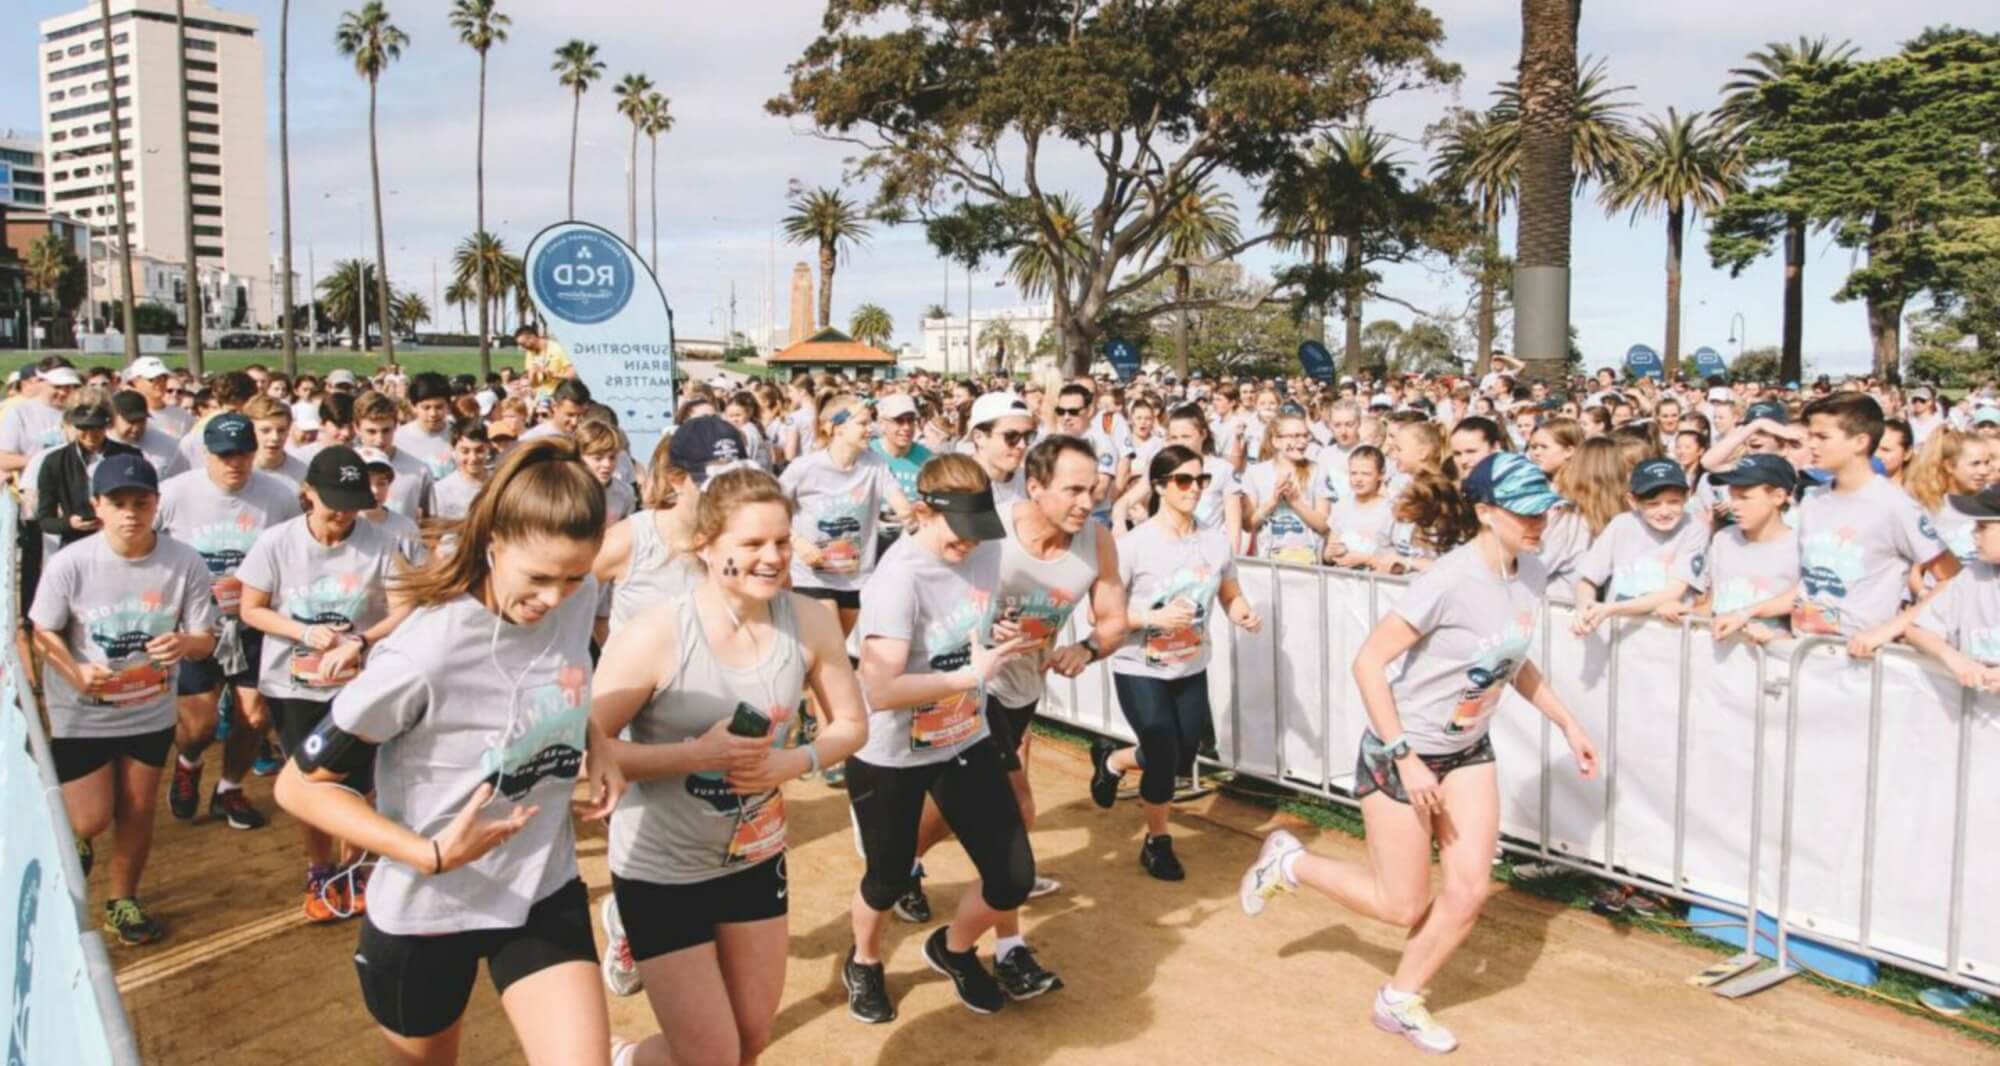 Connor’s Run smashes results and raises over $600,0000